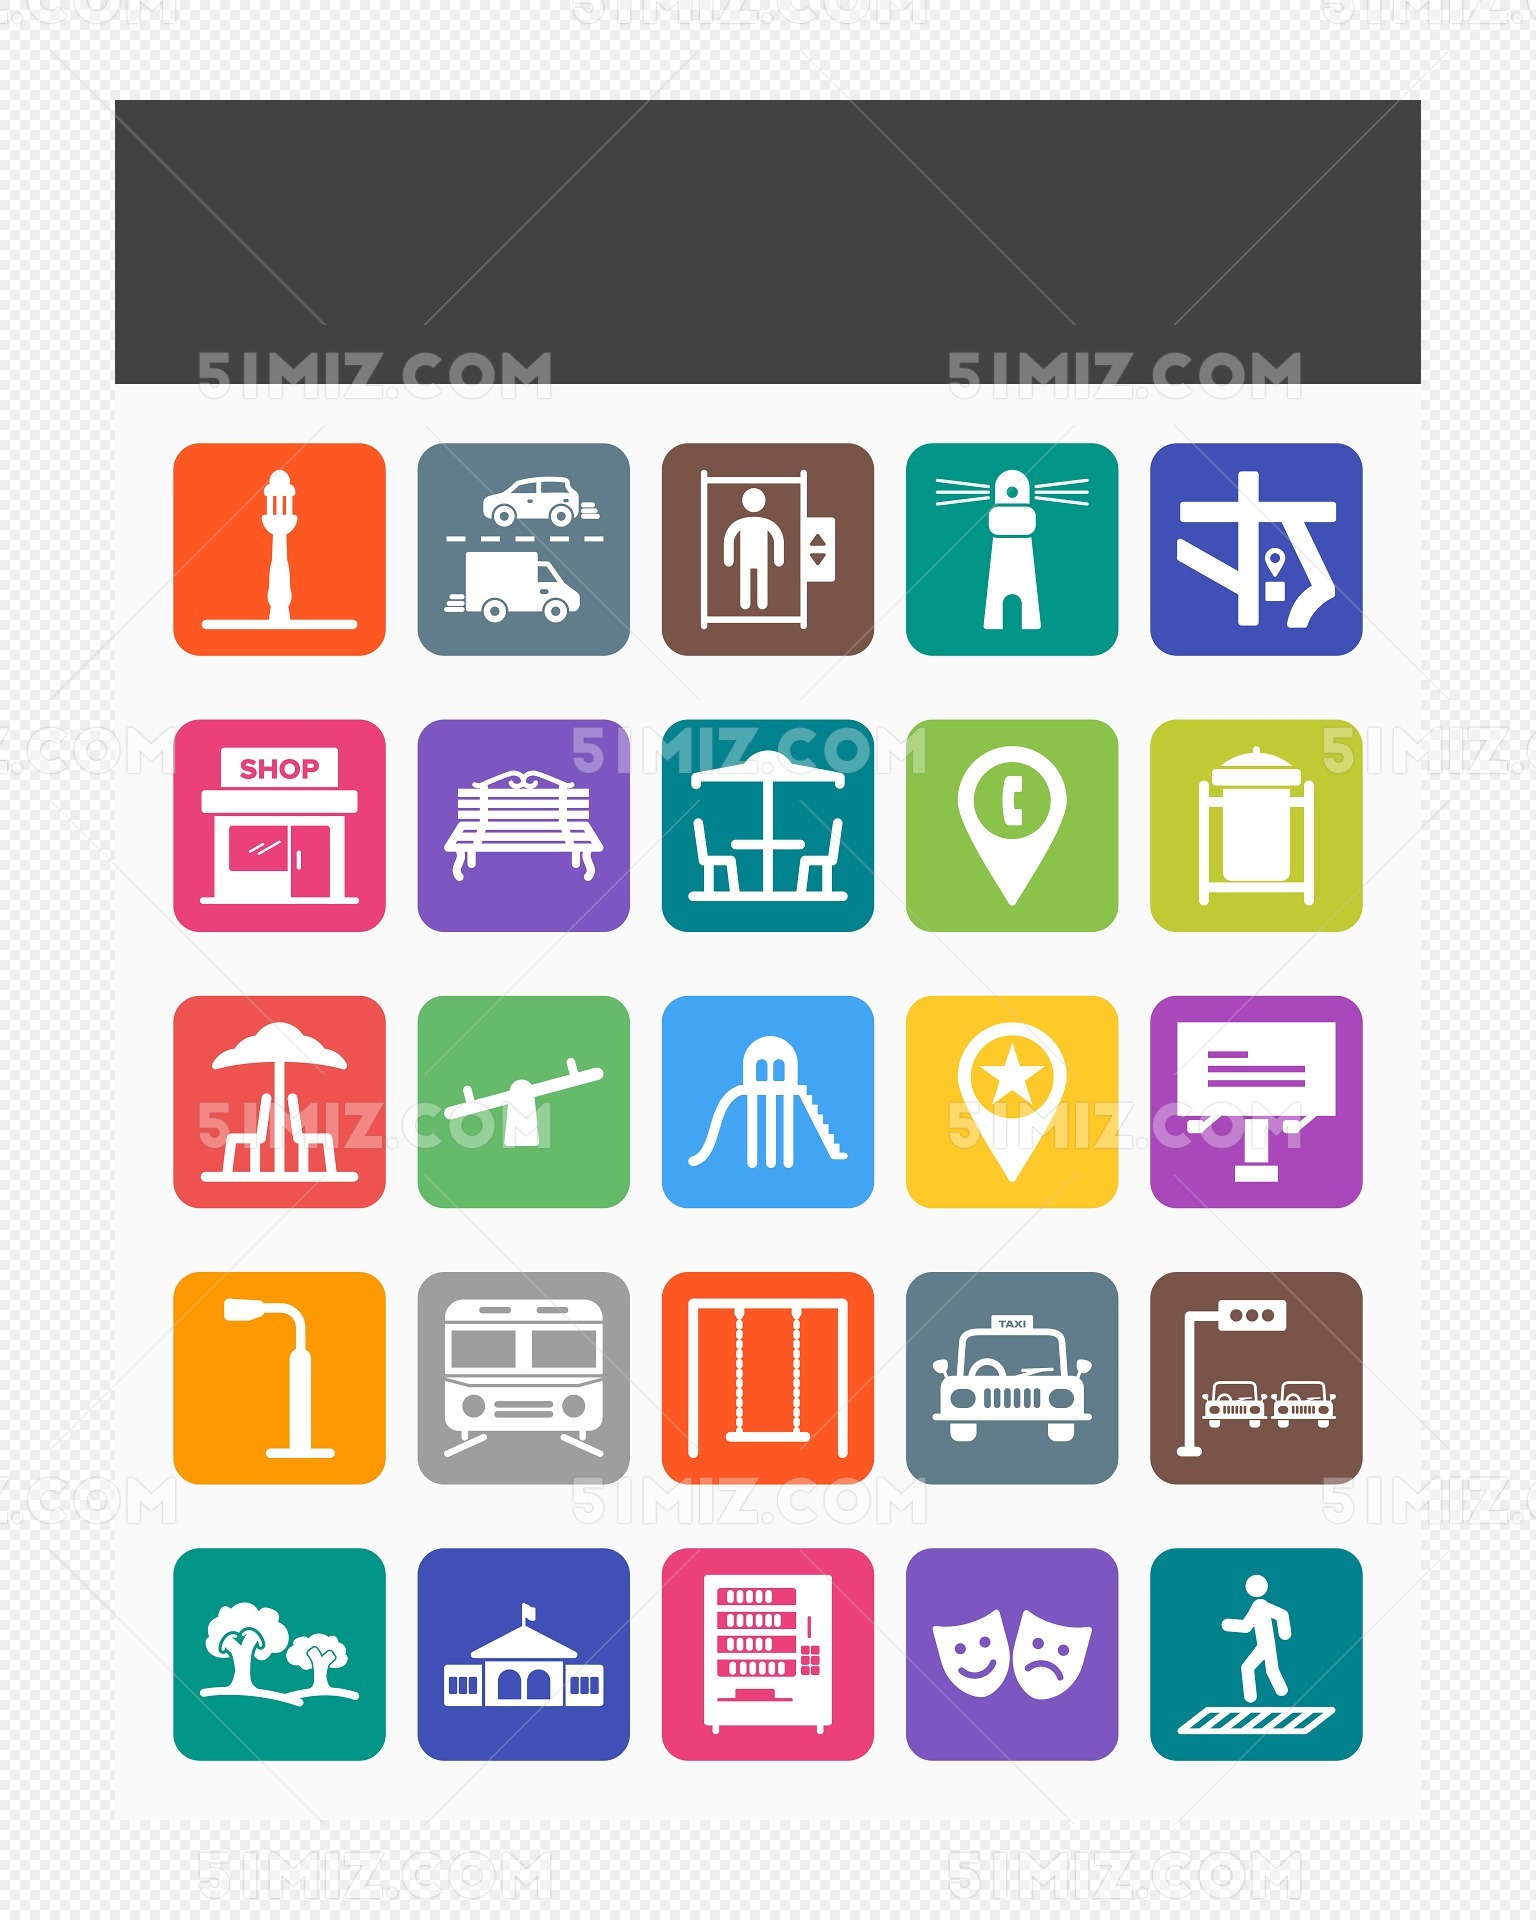 Tour And Travel Logo Png Free Transparent Clipart Clipartkey Images